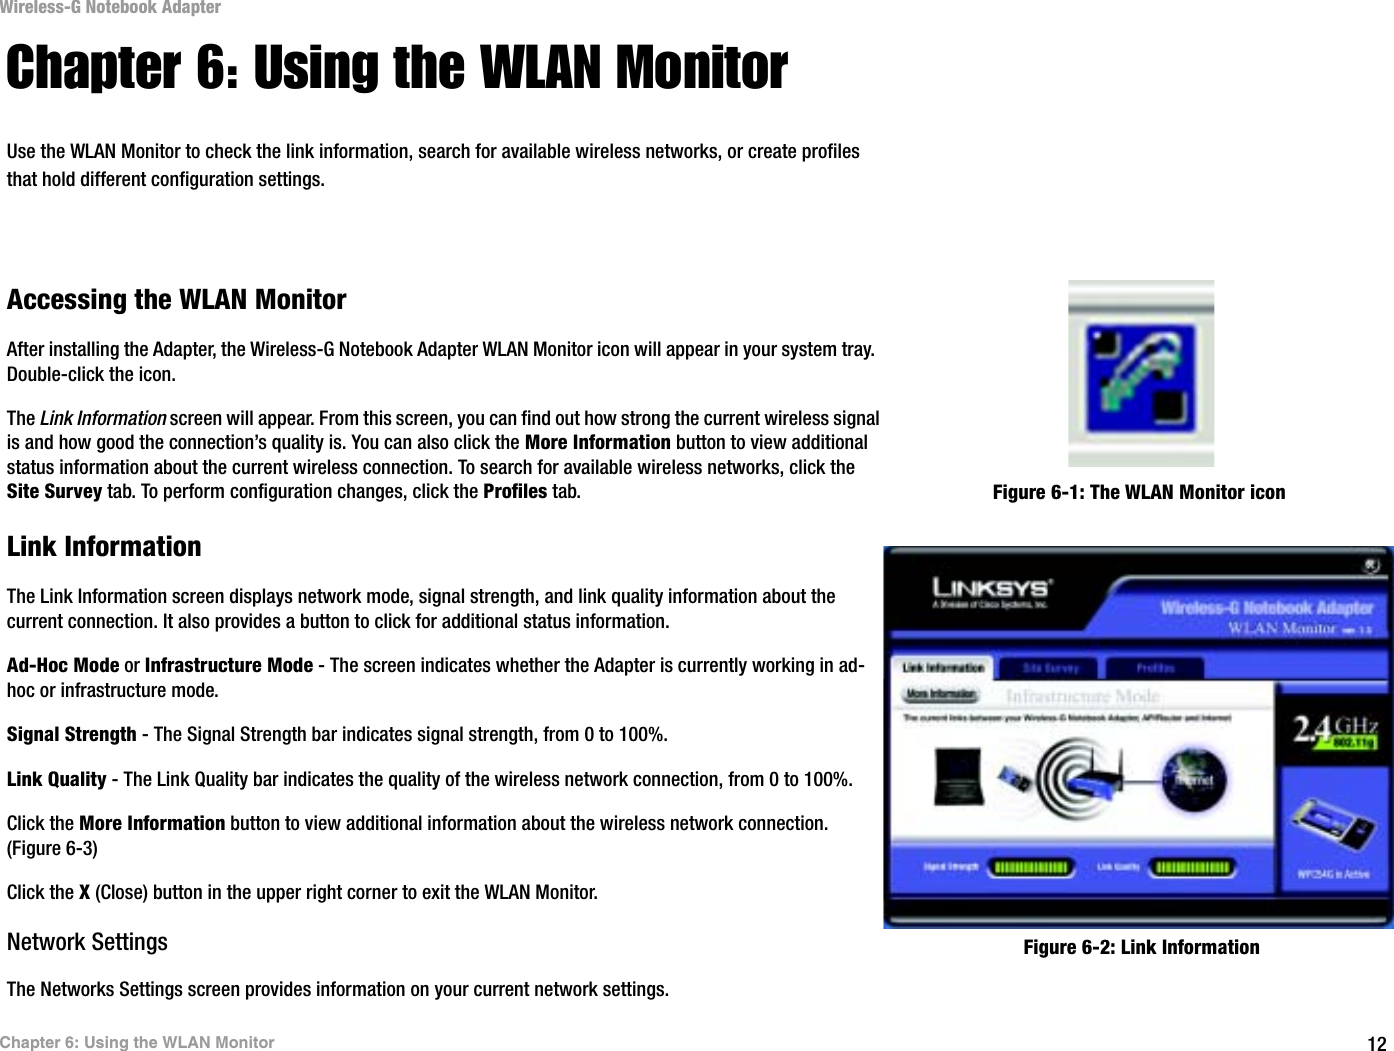 12Chapter 6: Using the WLAN MonitorWireless-G Notebook AdapterChapter 6: Using the WLAN MonitorUse the WLAN Monitor to check the link information, search for available wireless networks, or create profiles that hold different configuration settings.Accessing the WLAN MonitorAfter installing the Adapter, the Wireless-G Notebook Adapter WLAN Monitor icon will appear in your system tray.  Double-click the icon.The Link Information screen will appear. From this screen, you can find out how strong the current wireless signal is and how good the connection’s quality is. You can also click the More Information button to view additional status information about the current wireless connection. To search for available wireless networks, click the Site Survey tab. To perform configuration changes, click the Profiles tab.Link InformationThe Link Information screen displays network mode, signal strength, and link quality information about the current connection. It also provides a button to click for additional status information.  Ad-Hoc Mode or Infrastructure Mode - The screen indicates whether the Adapter is currently working in ad-hoc or infrastructure mode.Signal Strength - The Signal Strength bar indicates signal strength, from 0 to 100%. Link Quality - The Link Quality bar indicates the quality of the wireless network connection, from 0 to 100%.Click the More Information button to view additional information about the wireless network connection. (Figure 6-3) Click the X (Close) button in the upper right corner to exit the WLAN Monitor.Network SettingsThe Networks Settings screen provides information on your current network settings.Figure 6-1: The WLAN Monitor iconFigure 6-2: Link Information